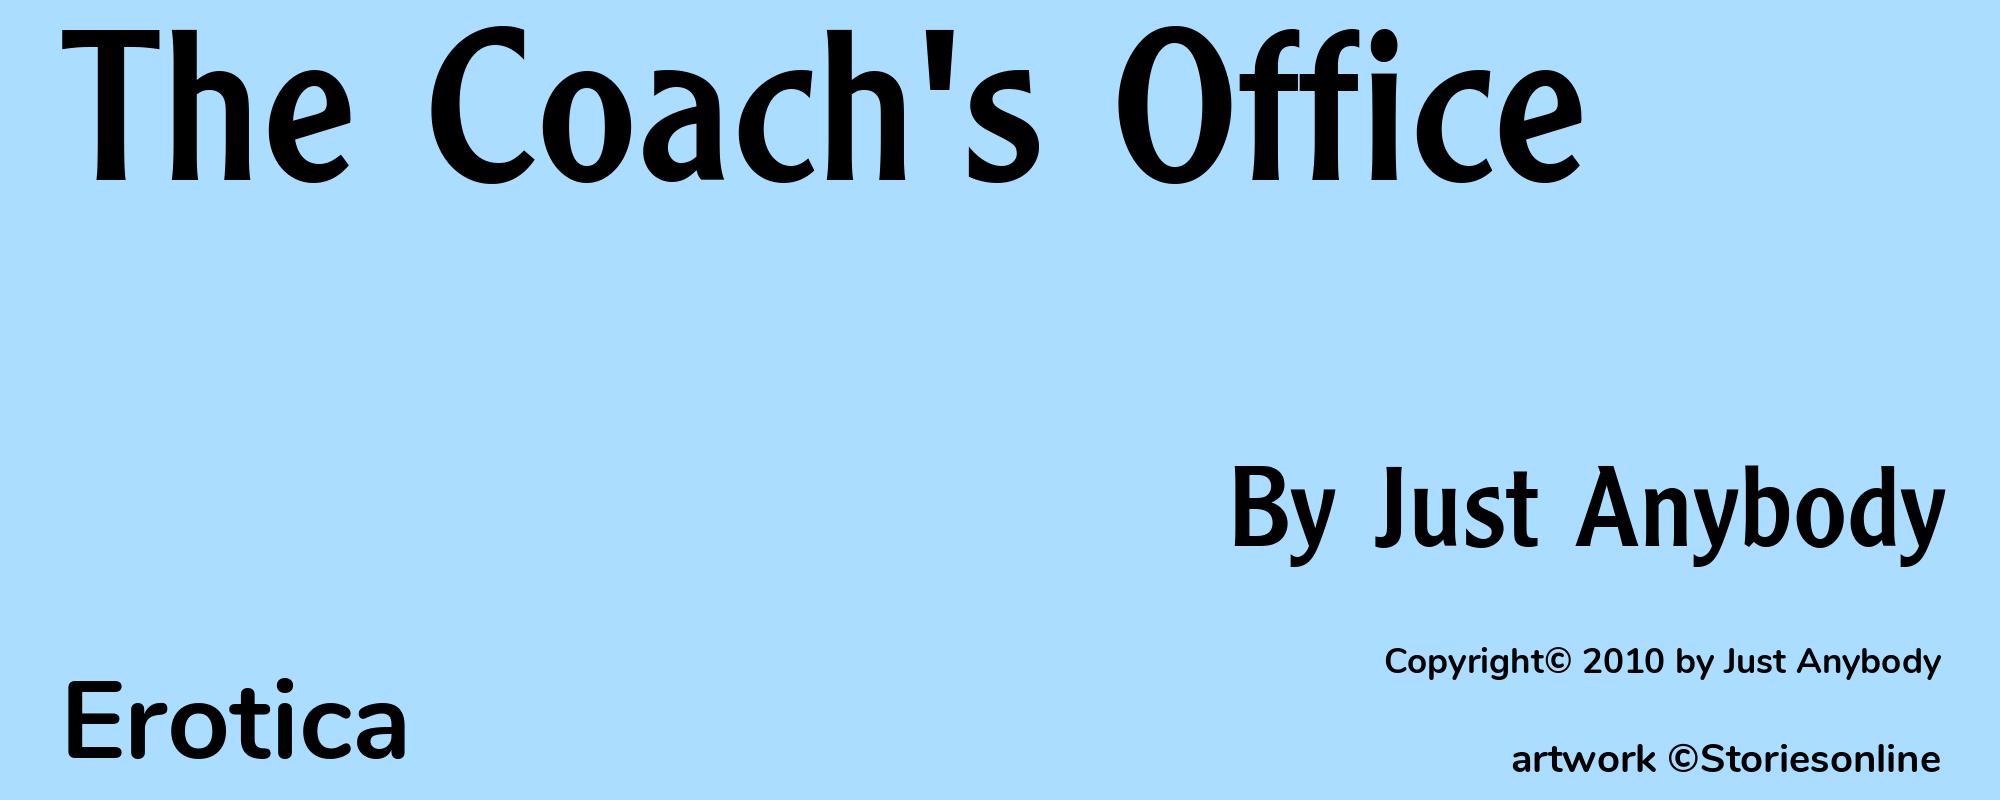 The Coach's Office - Cover